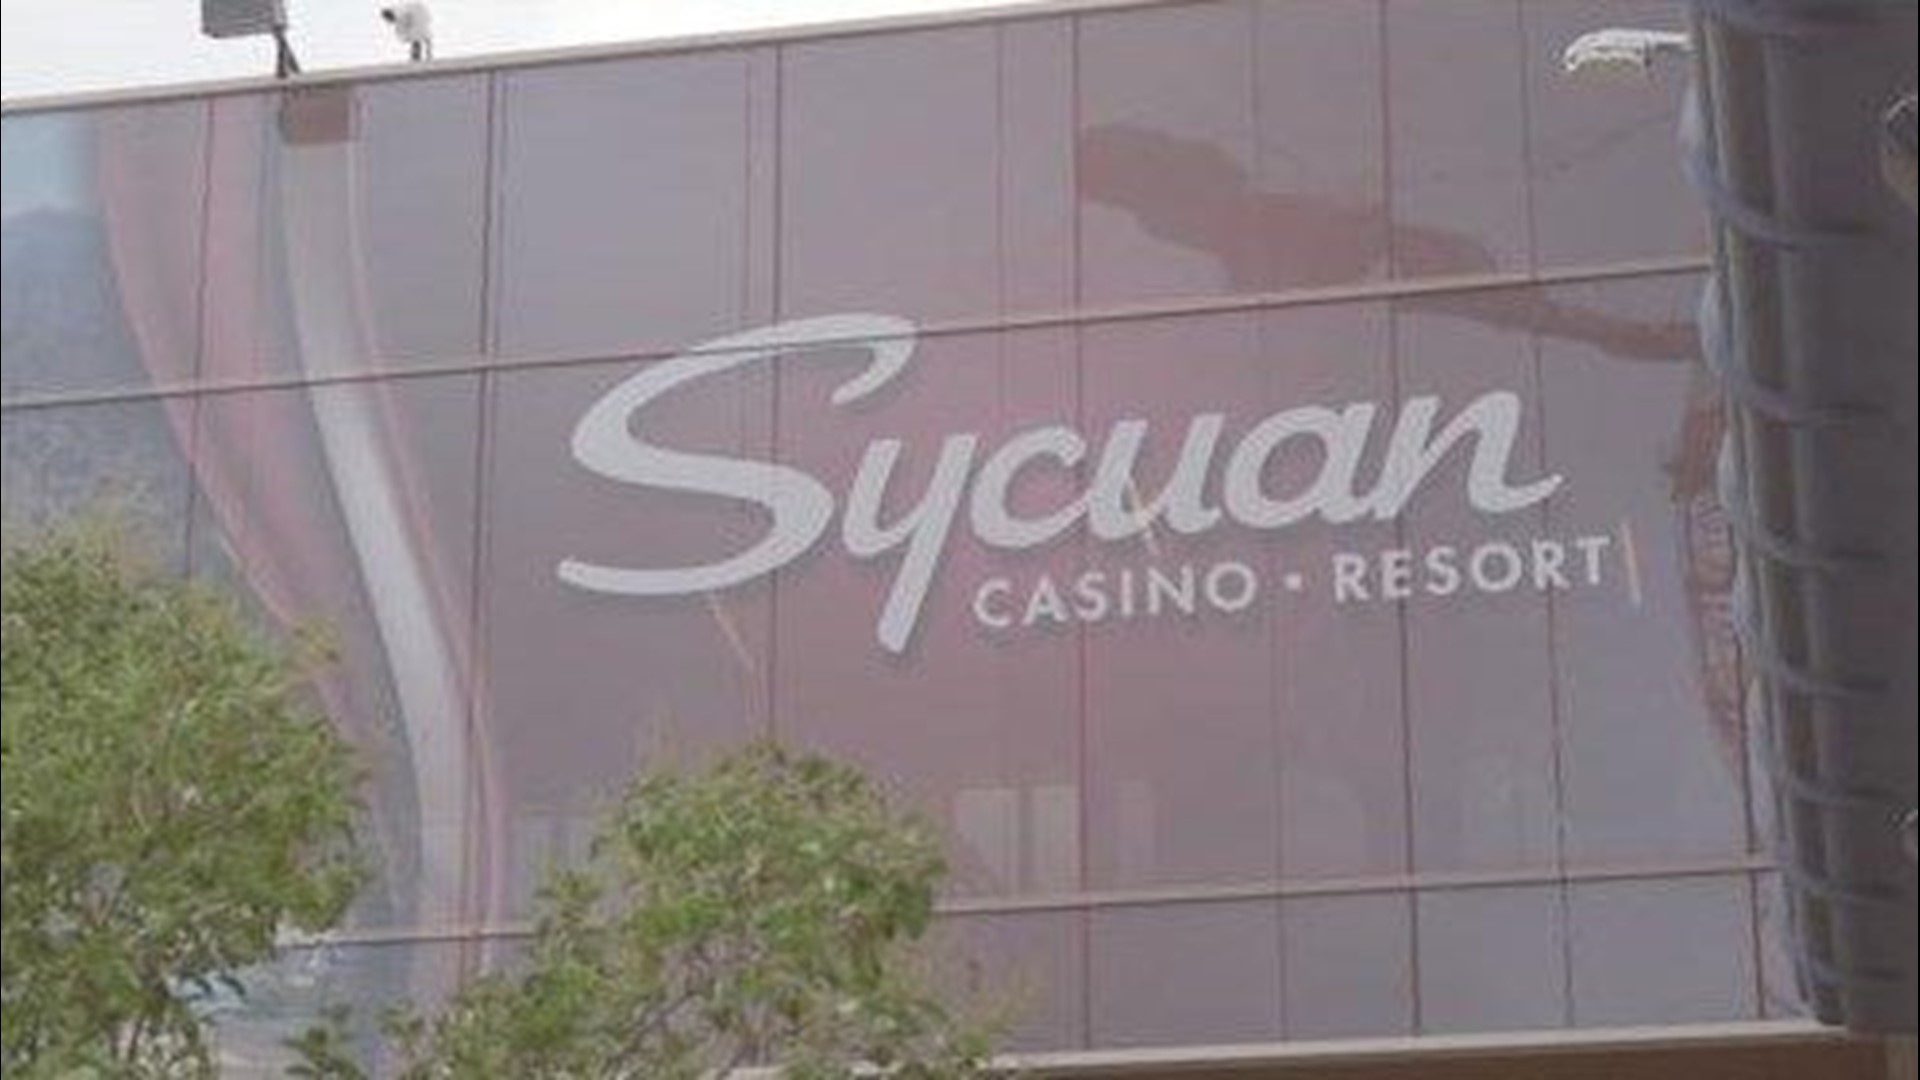 is sycuan casino open yet